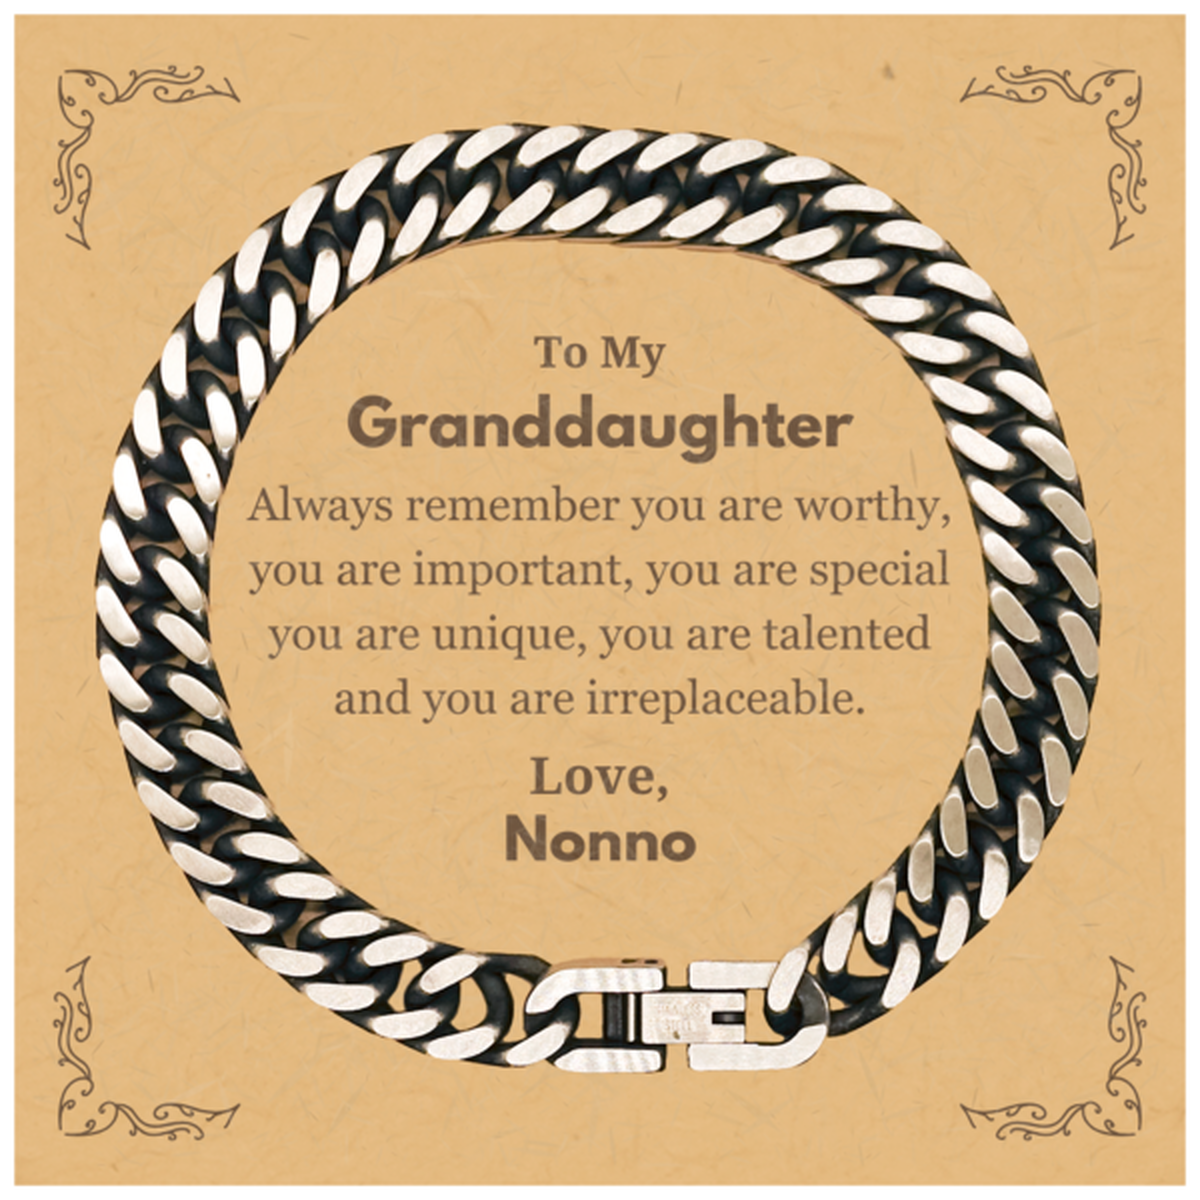 Granddaughter Birthday Gifts from Nonno, Inspirational Cuban Link Chain Bracelet for Granddaughter Christmas Graduation Gifts for Granddaughter Always remember you are worthy, you are important. Love, Nonno